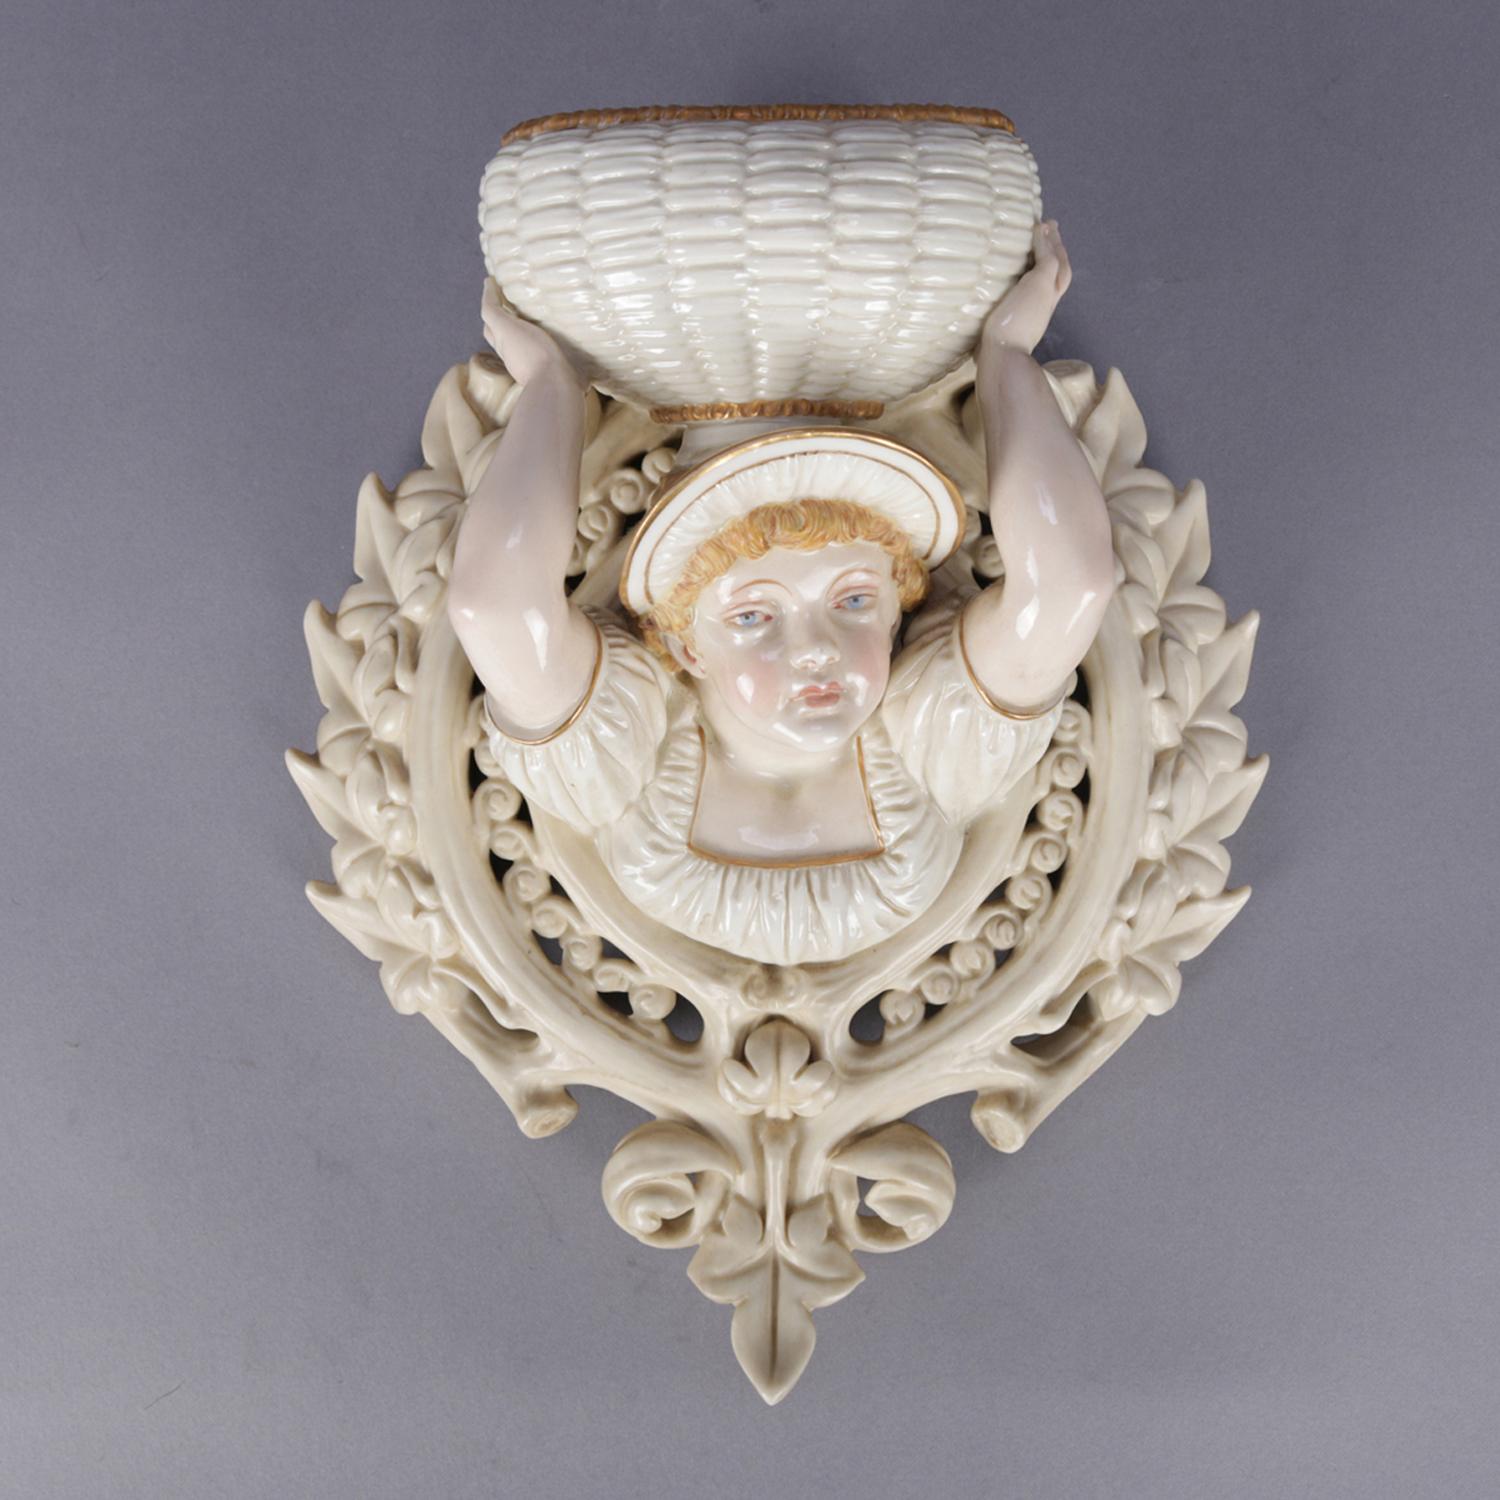 An antique English figural wall pocket by Royal Worcester featuring porcelain construction with hand painted and gilt girl holding basket and encircled in ivy wreath, en verso maker stamp, circa 1880

Measures: 11.5